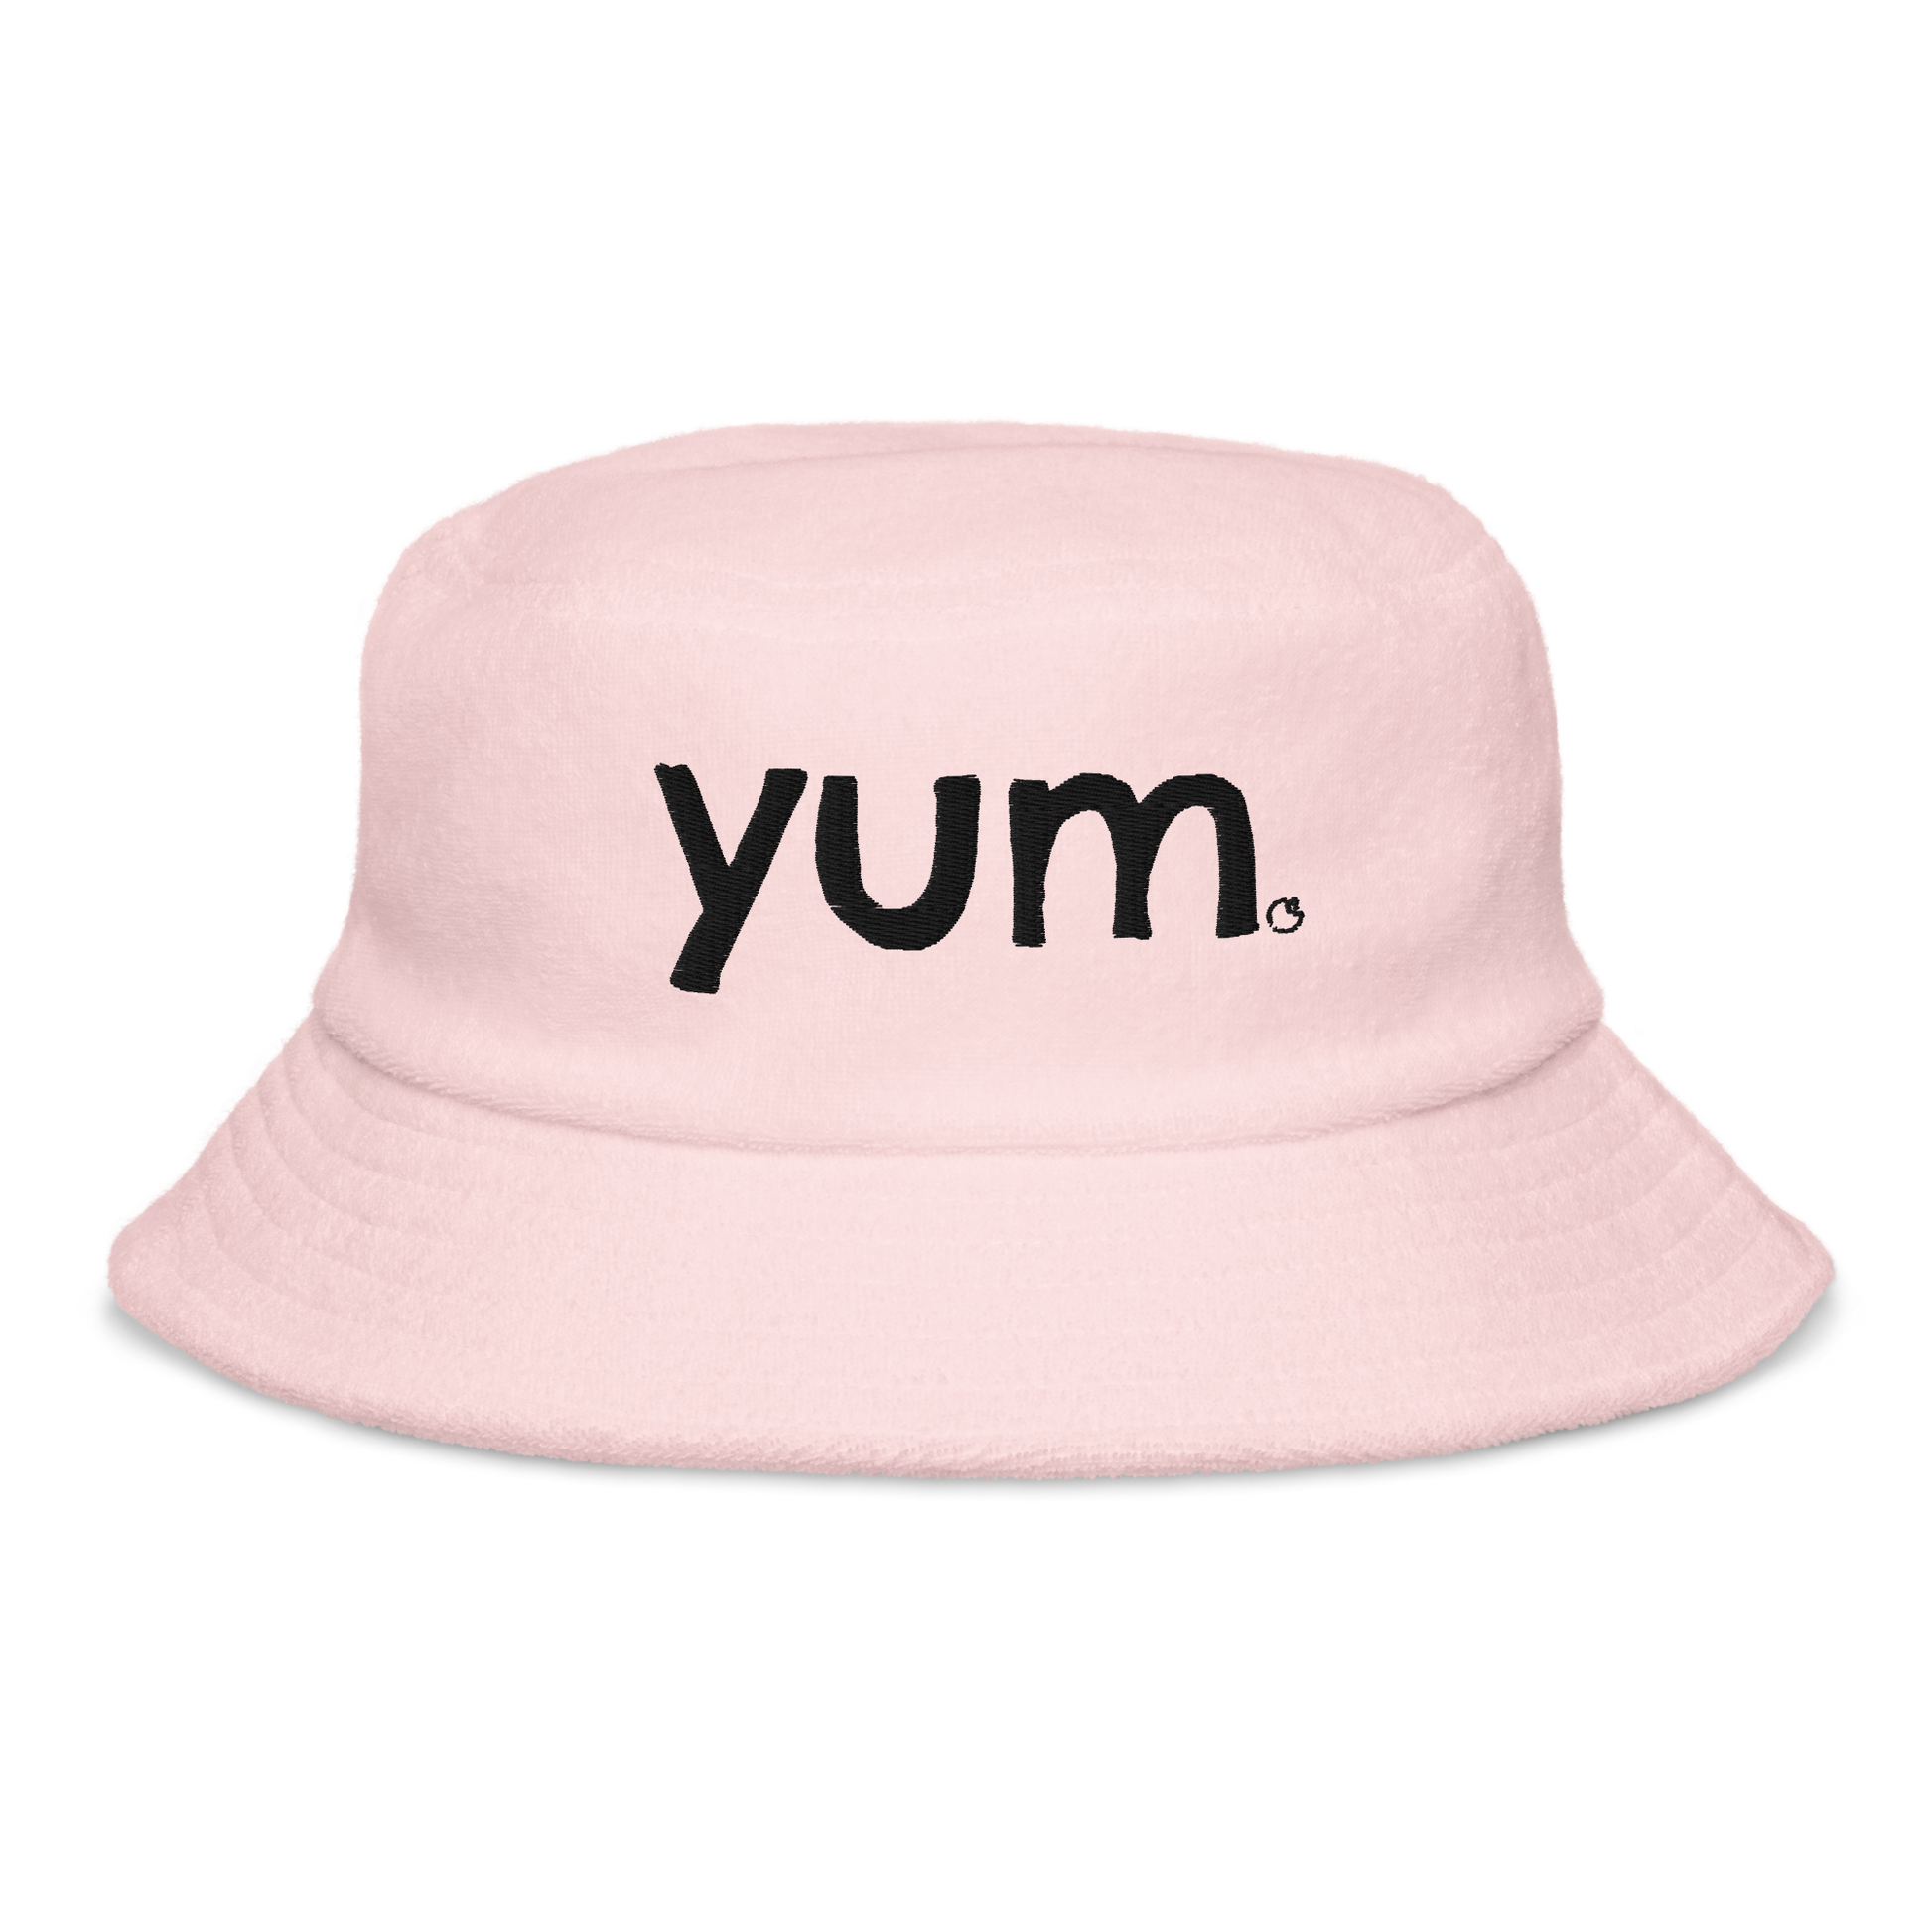 Beat the heat in style with our YUM Terry Cloth Bucket Hat. Color: Lt. Pink